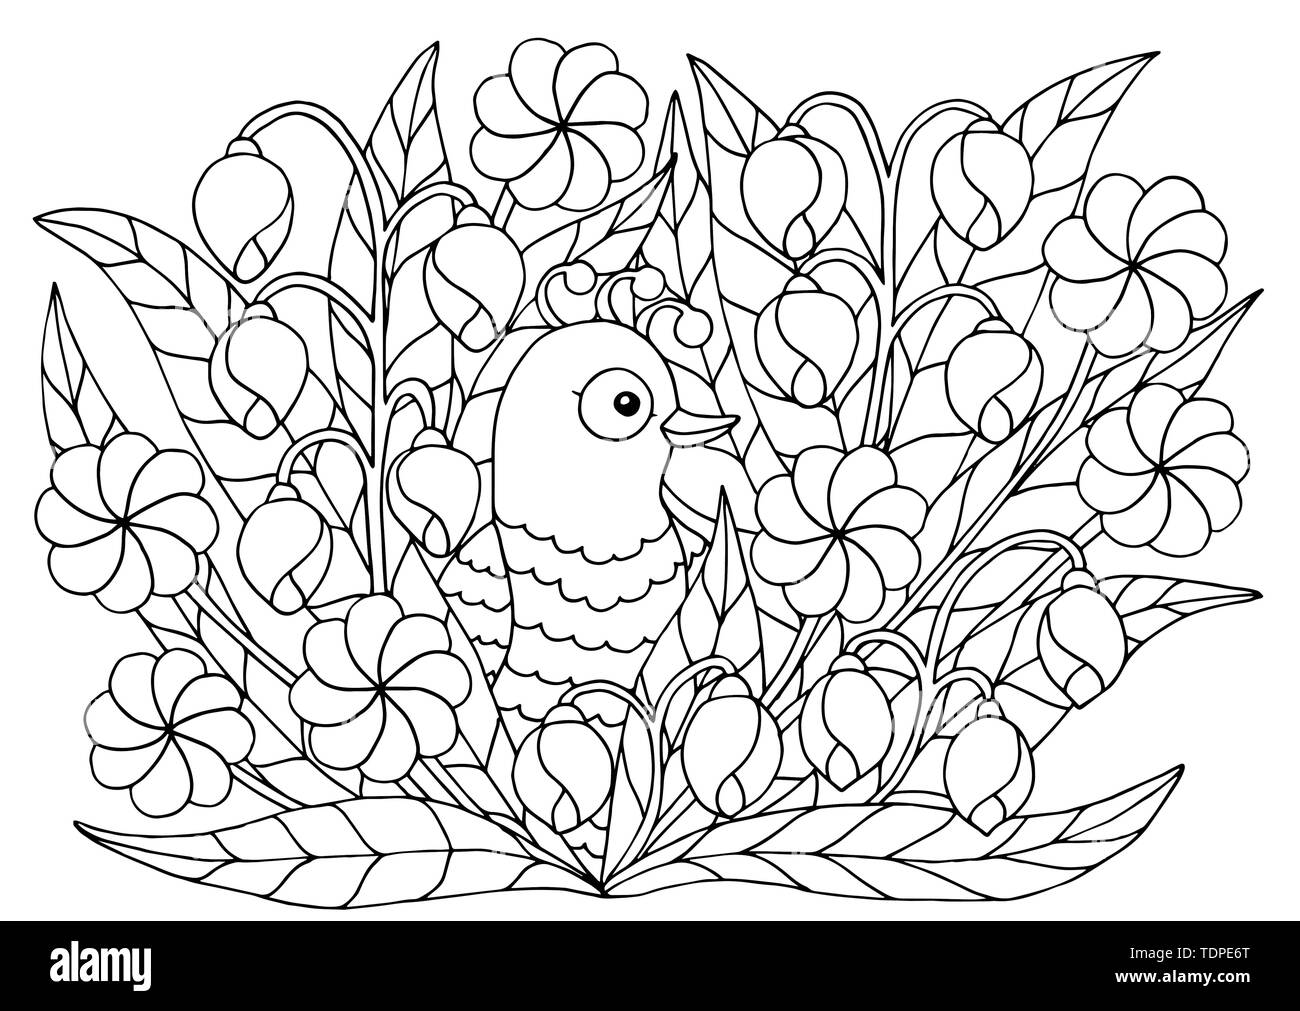 Cute abstract coloring page with summer flowers and bird for kids and adults stock vector image art